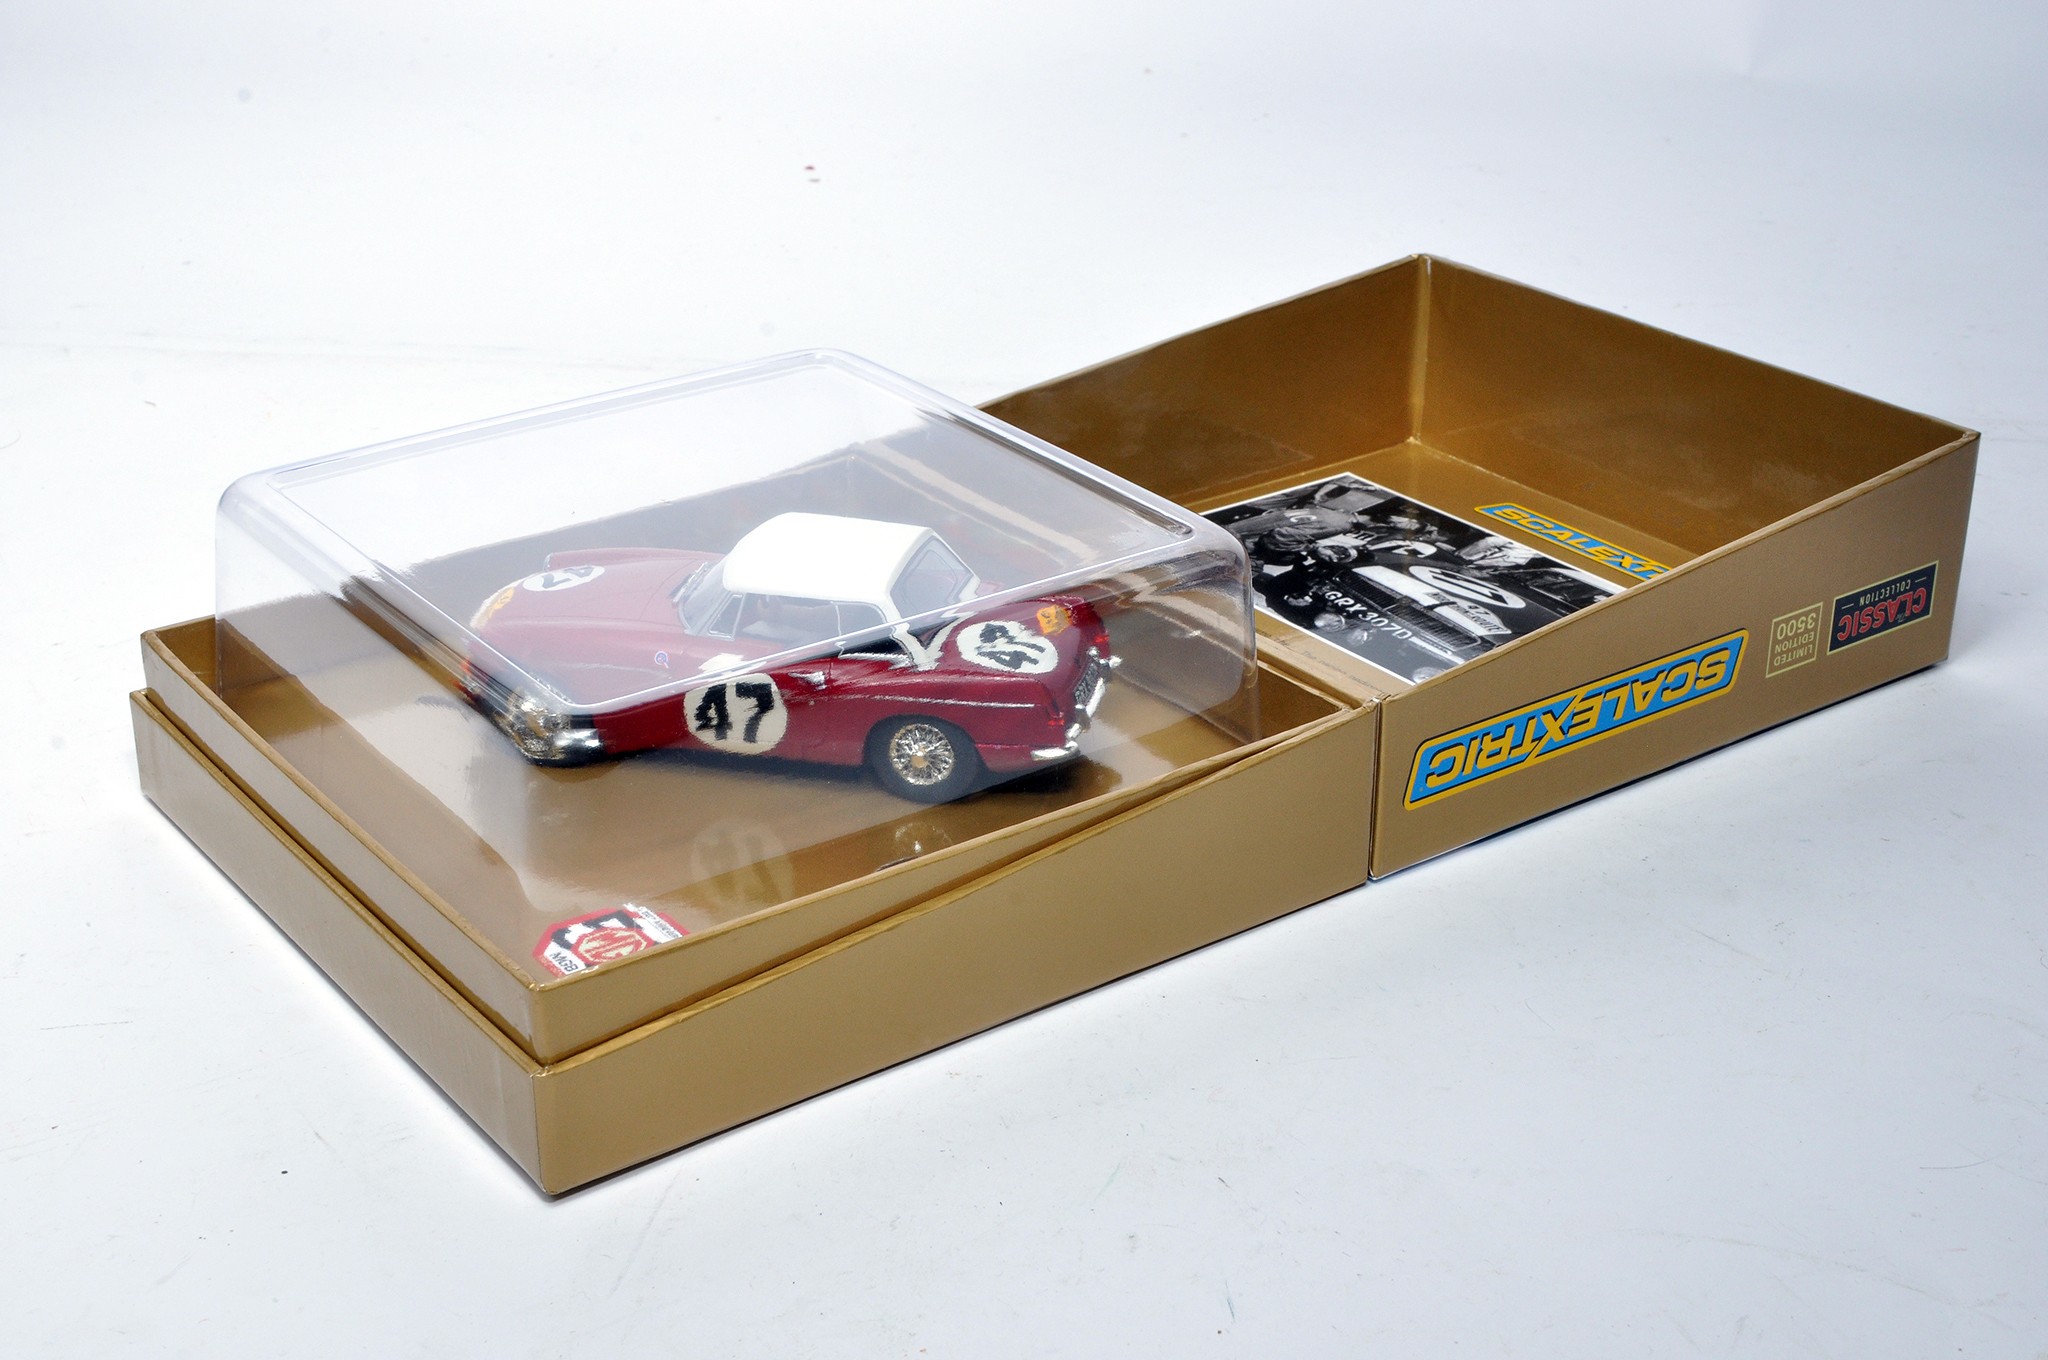 Scalextric 50th Anniversary Limited Edition slot car issue, looks to be without fault in excellent